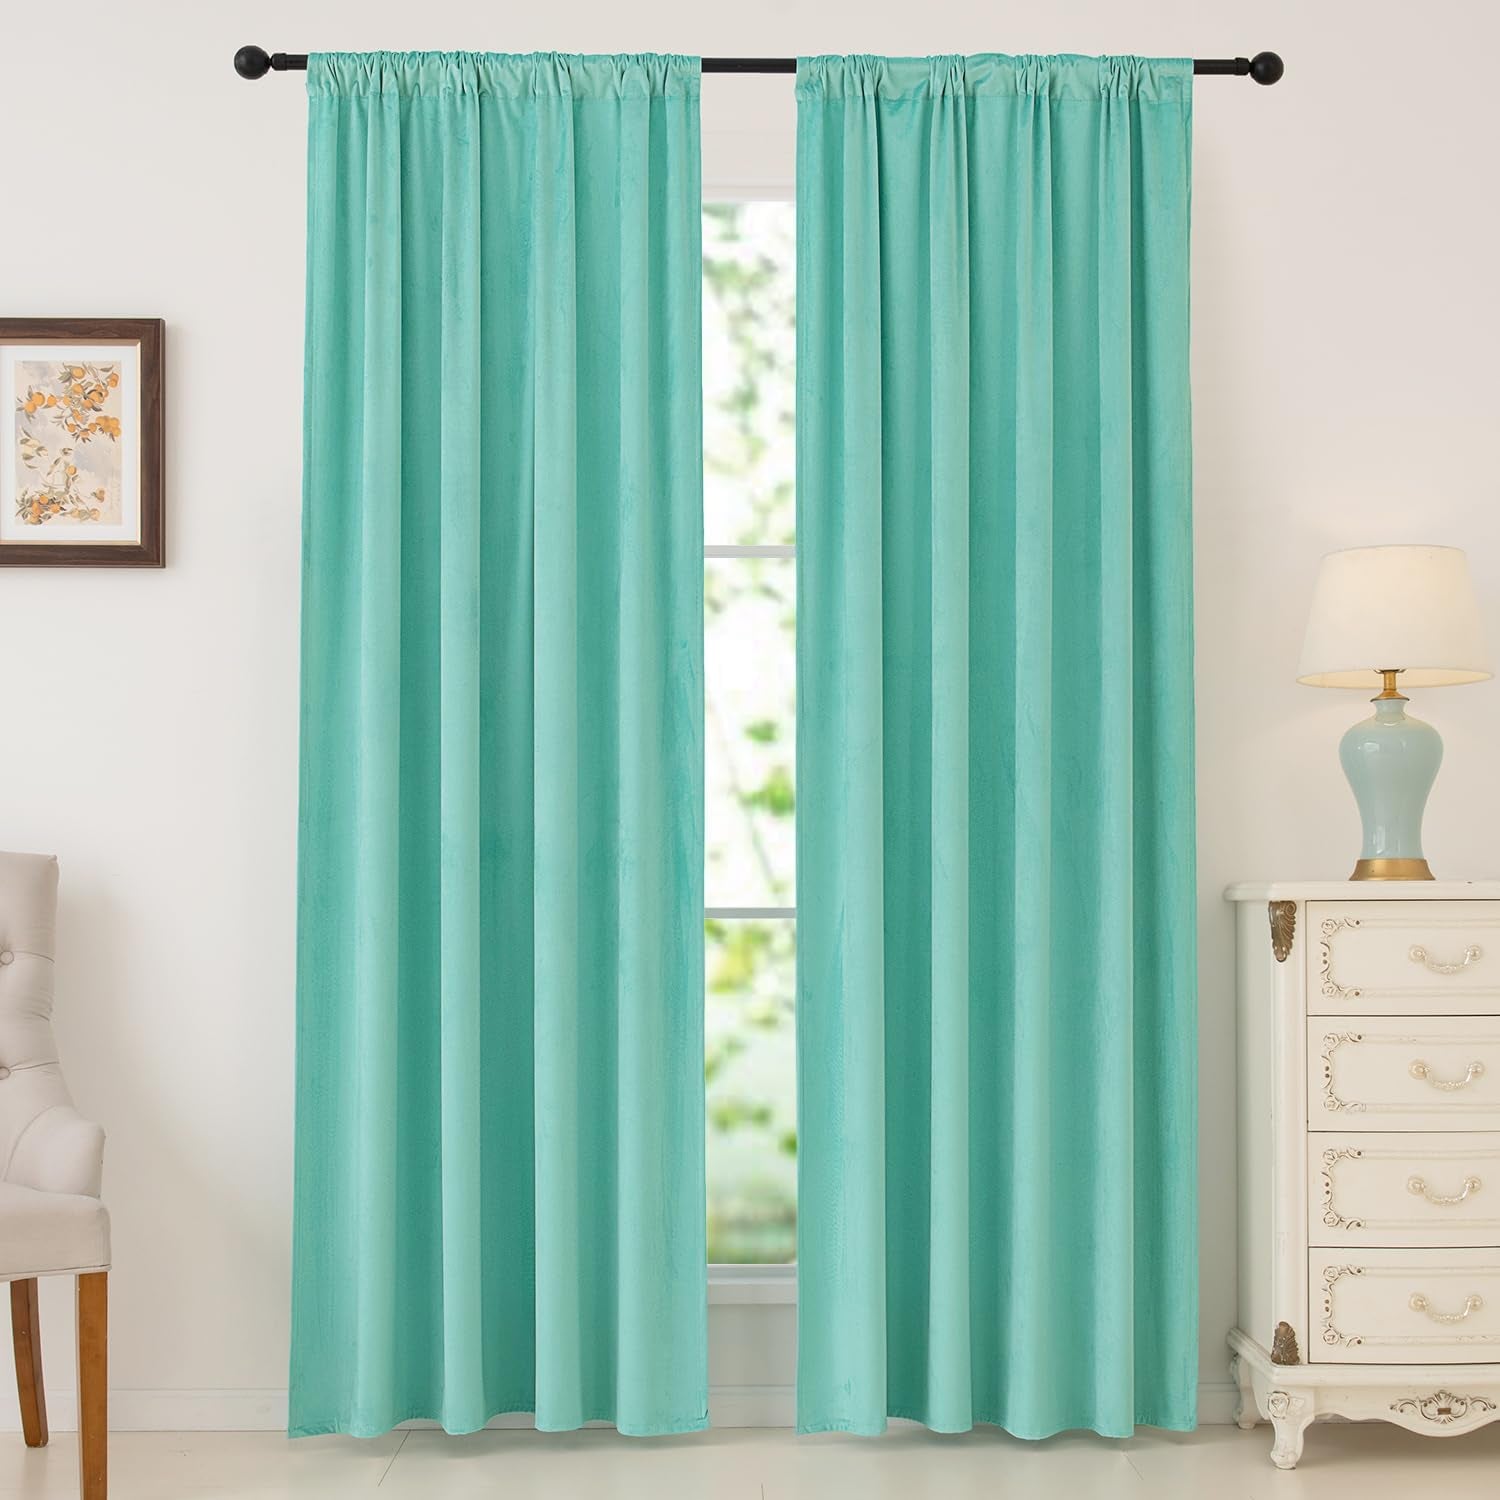 Nanbowang Green Velvet Curtains 63 Inches Long Dark Green Light Blocking Rod Pocket Window Curtain Panels Set of 2 Heat Insulated Curtains Thermal Curtain Panels for Bedroom  nanbowang Aqua 52"X84" 